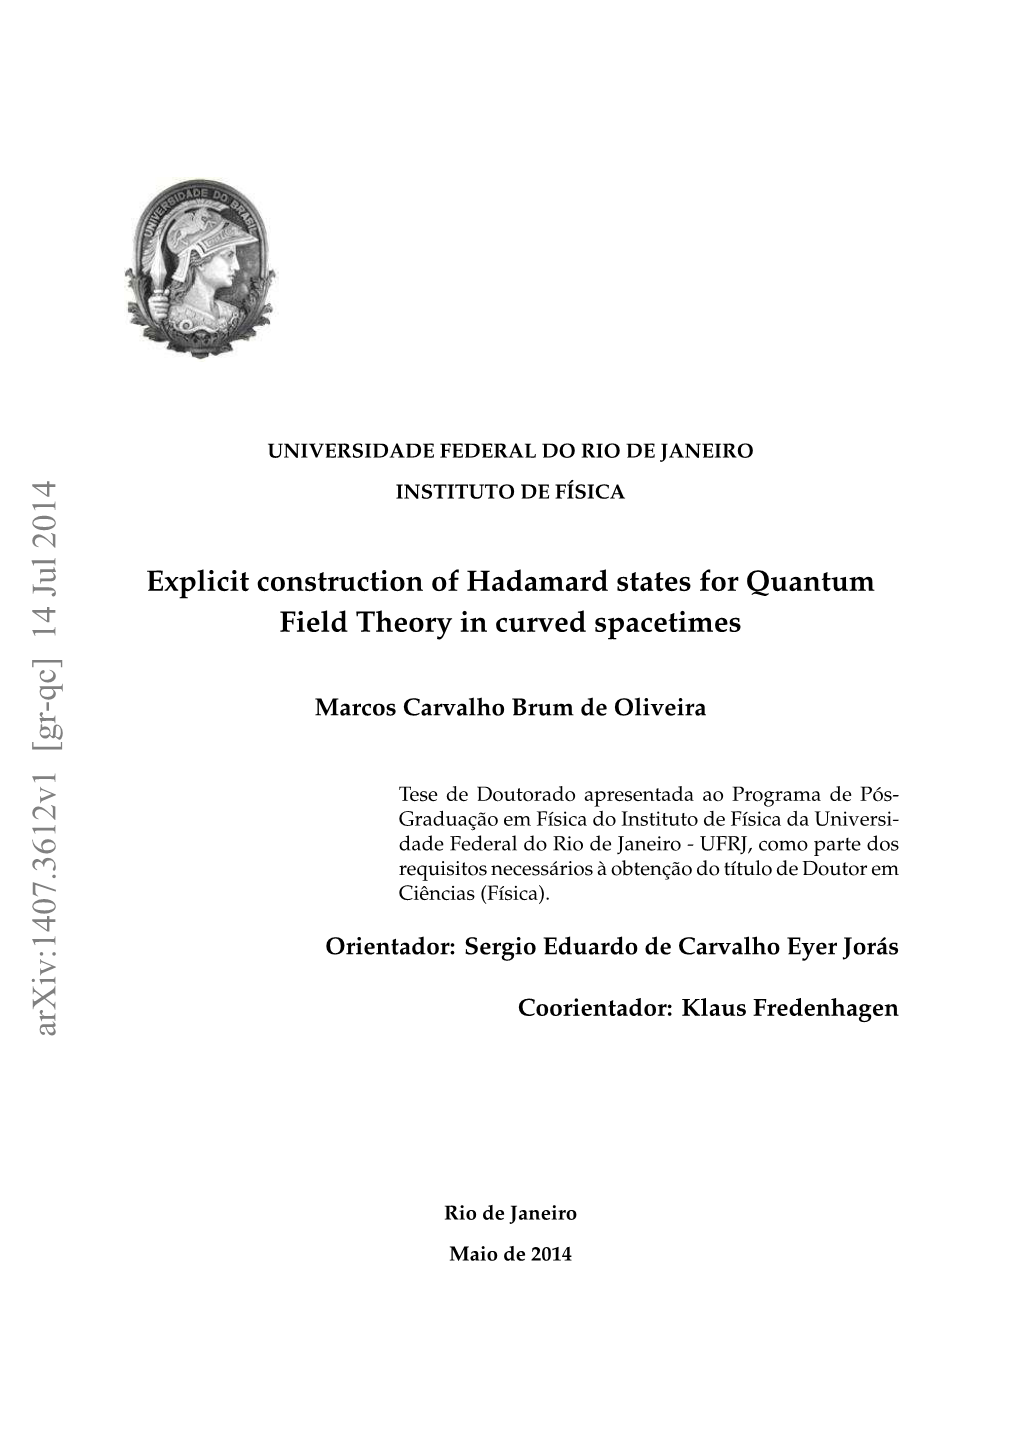 Explicit Construction of Hadamard States for Quantum Field Theory in Curved Spacetimes